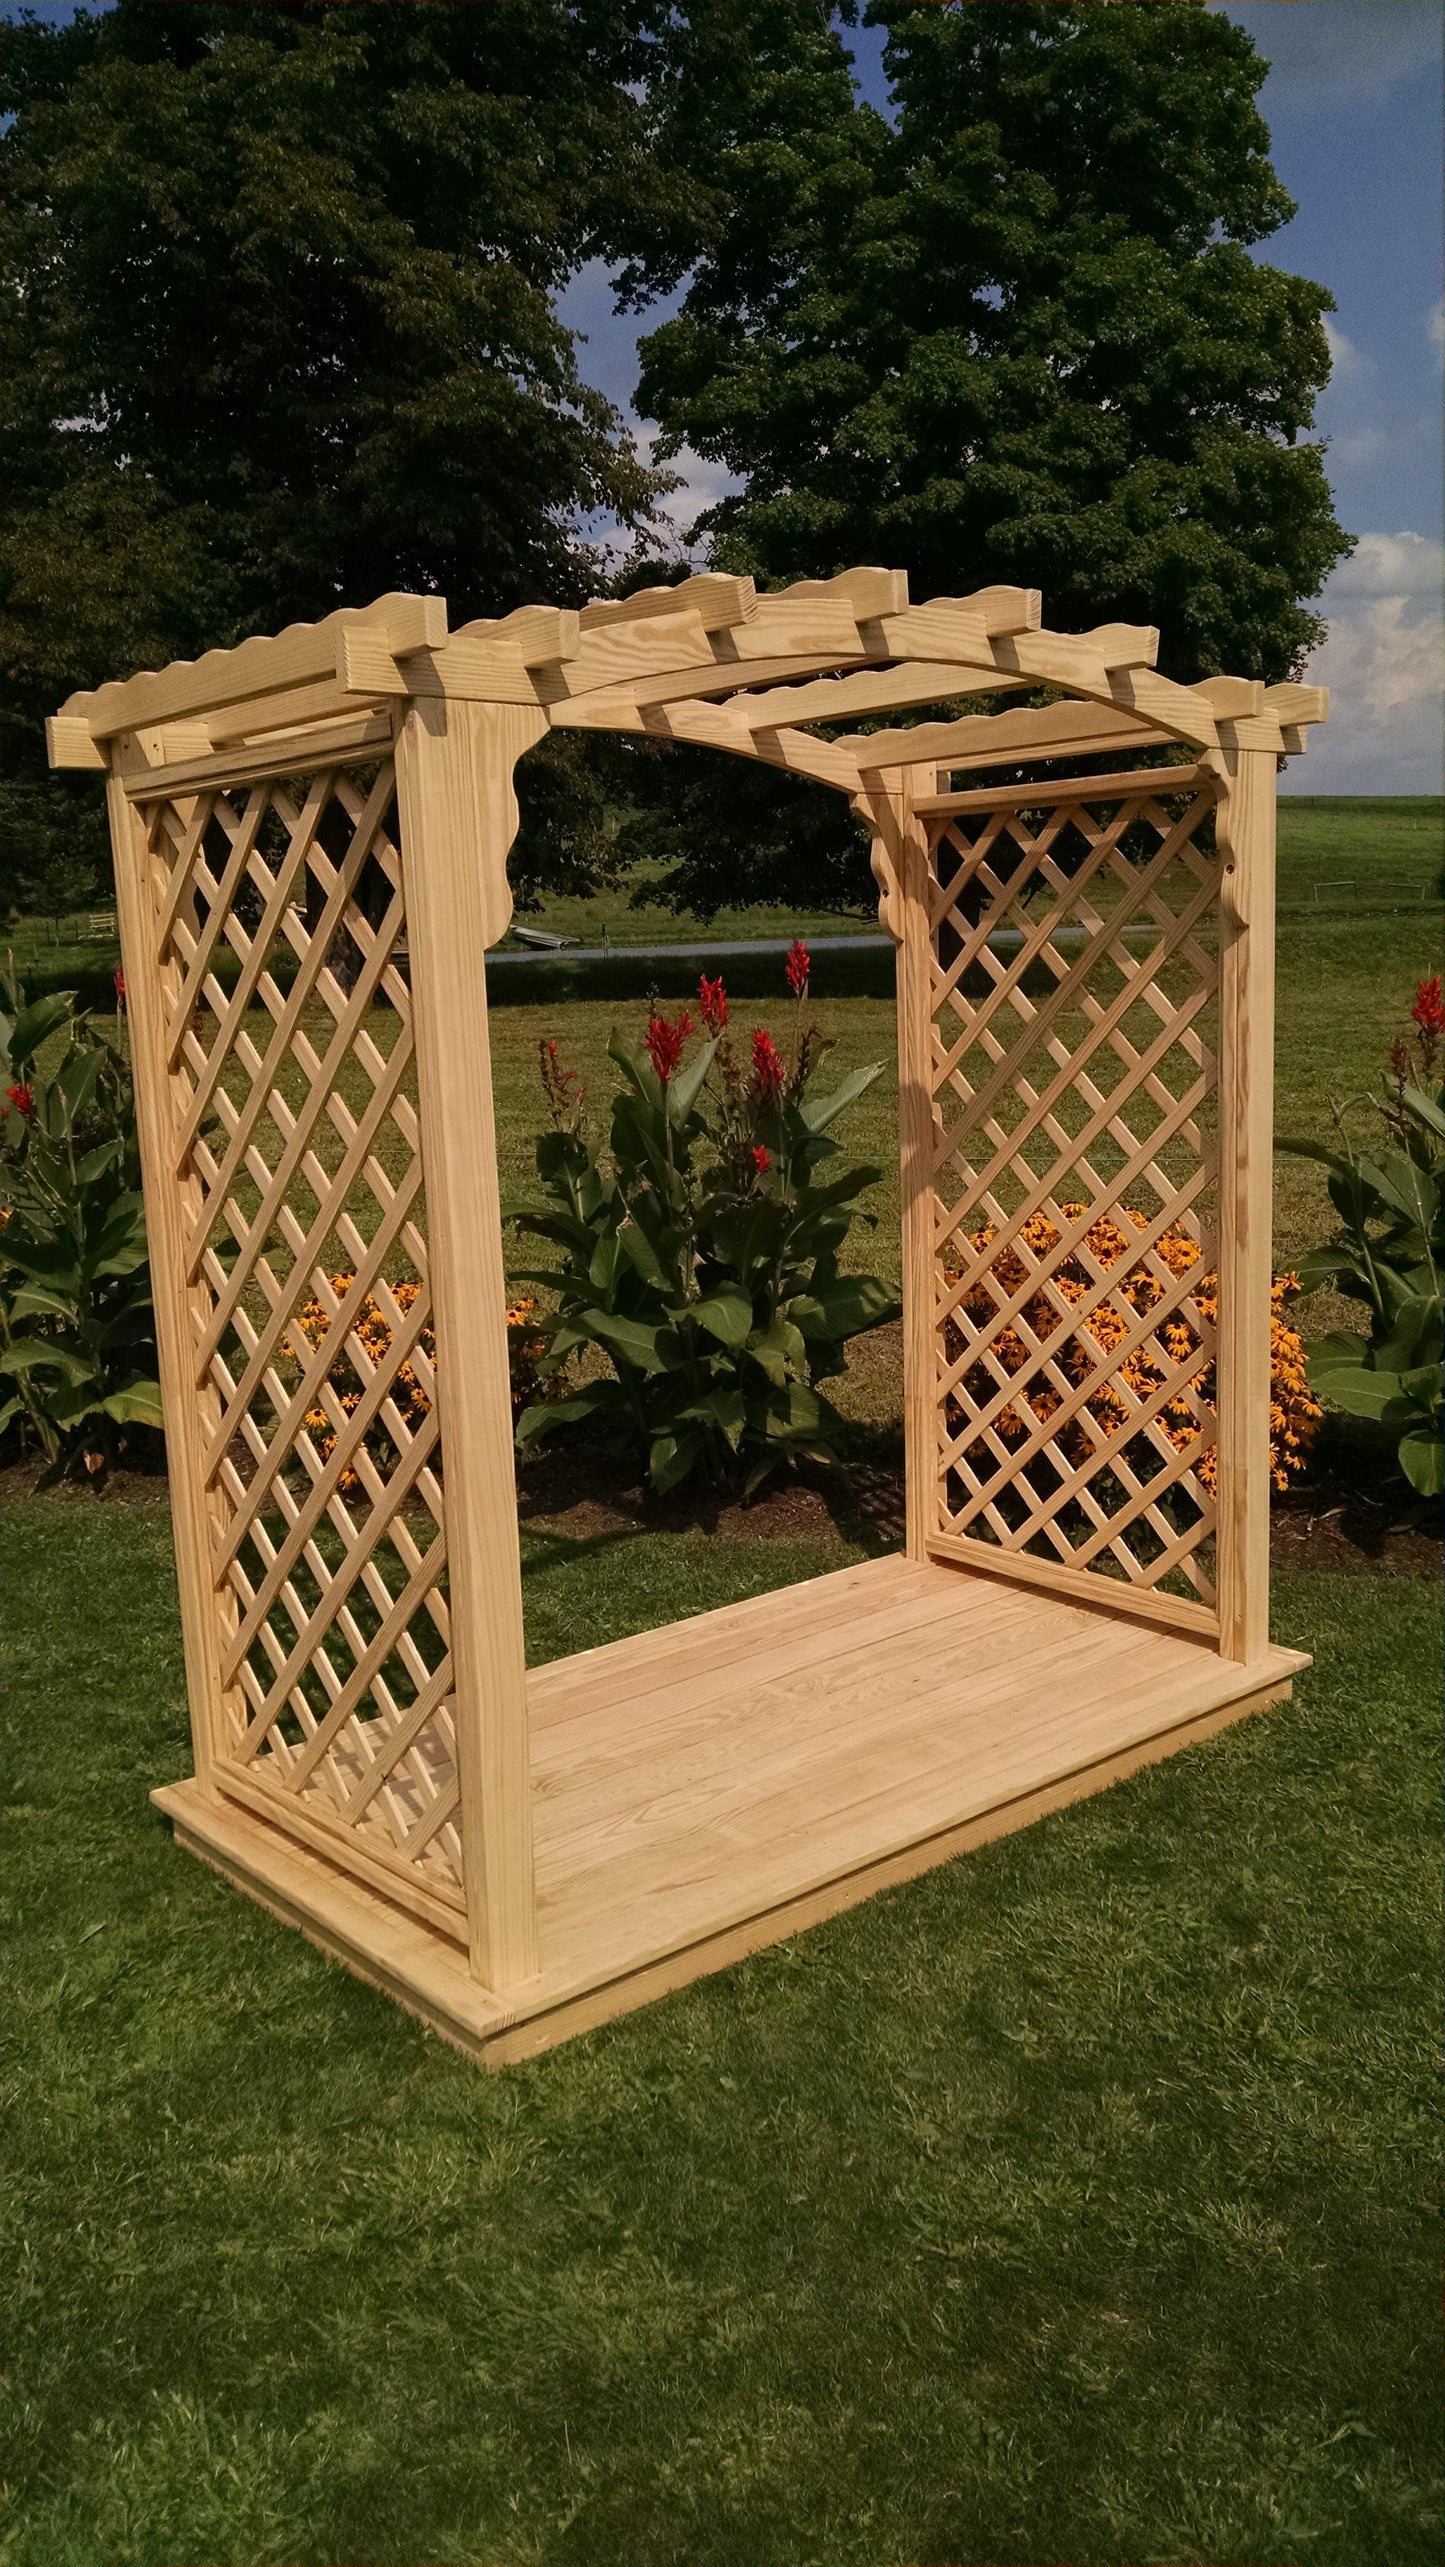 A&L FURNITURE CO. 6' Jamesport Pressure Treated Pine Arbor & Deck - LEAD TIME TO SHIP 10 BUSINESS DAYS